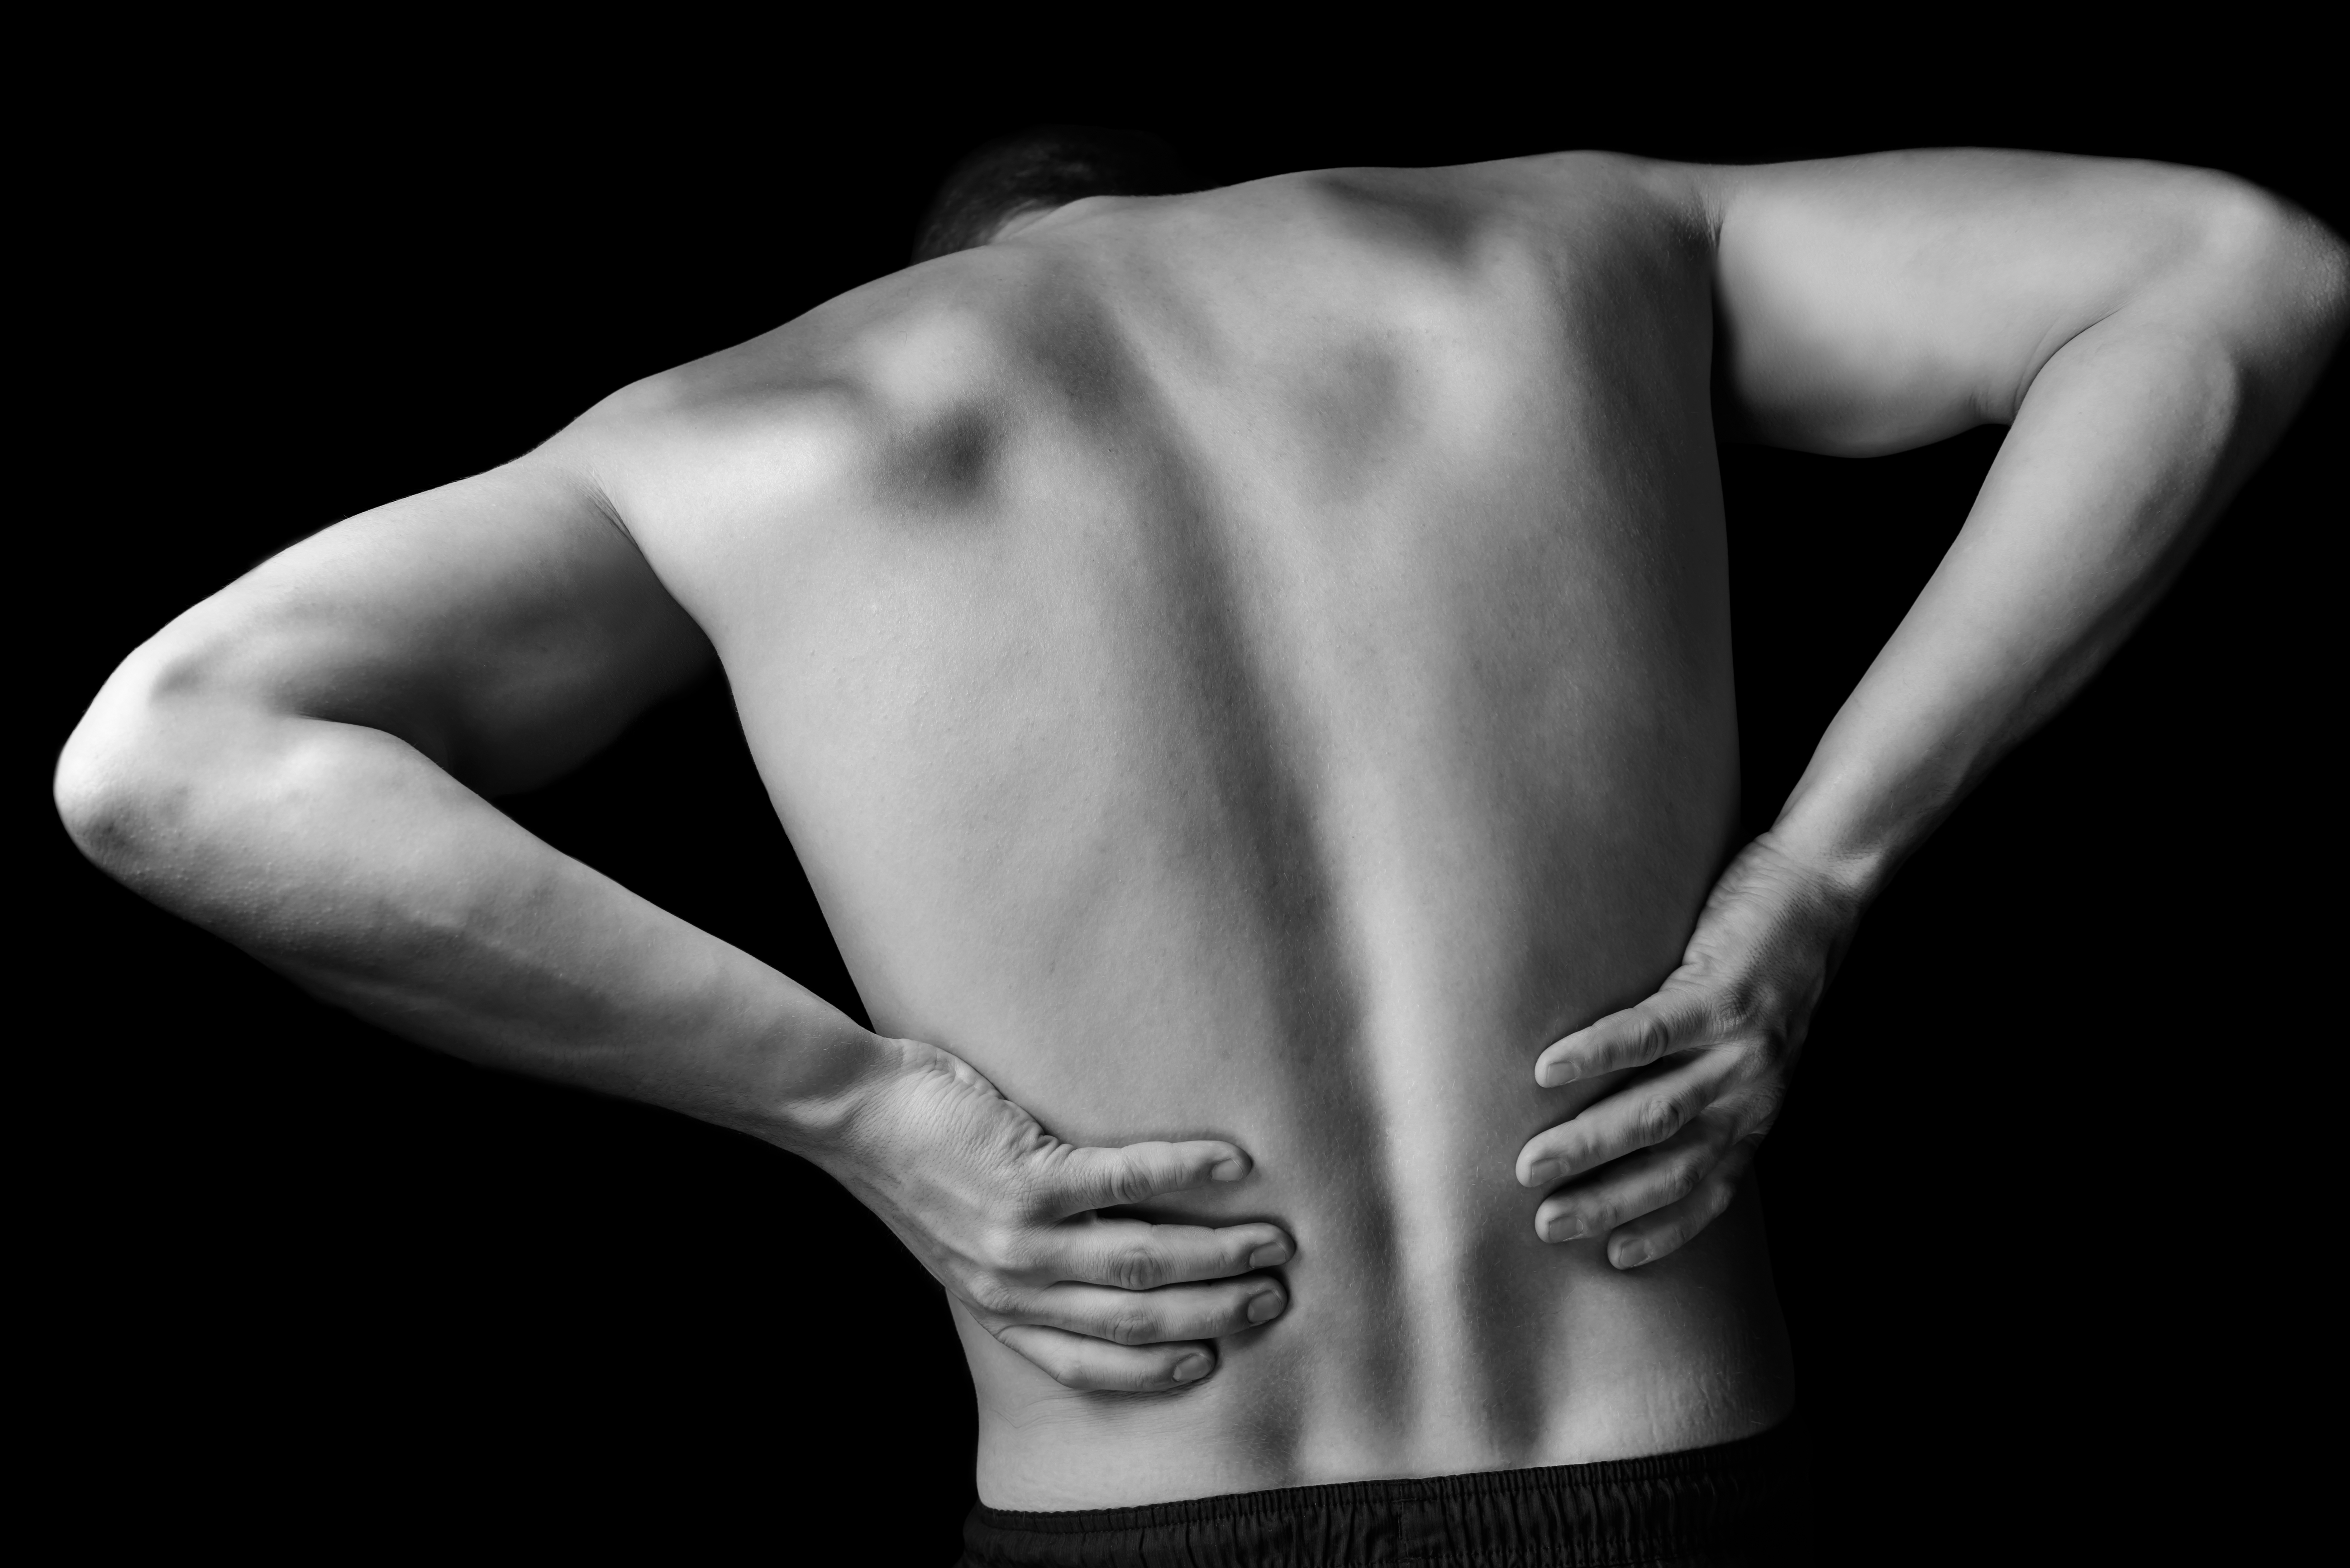 Acute pain in a male lower back, monochrome image